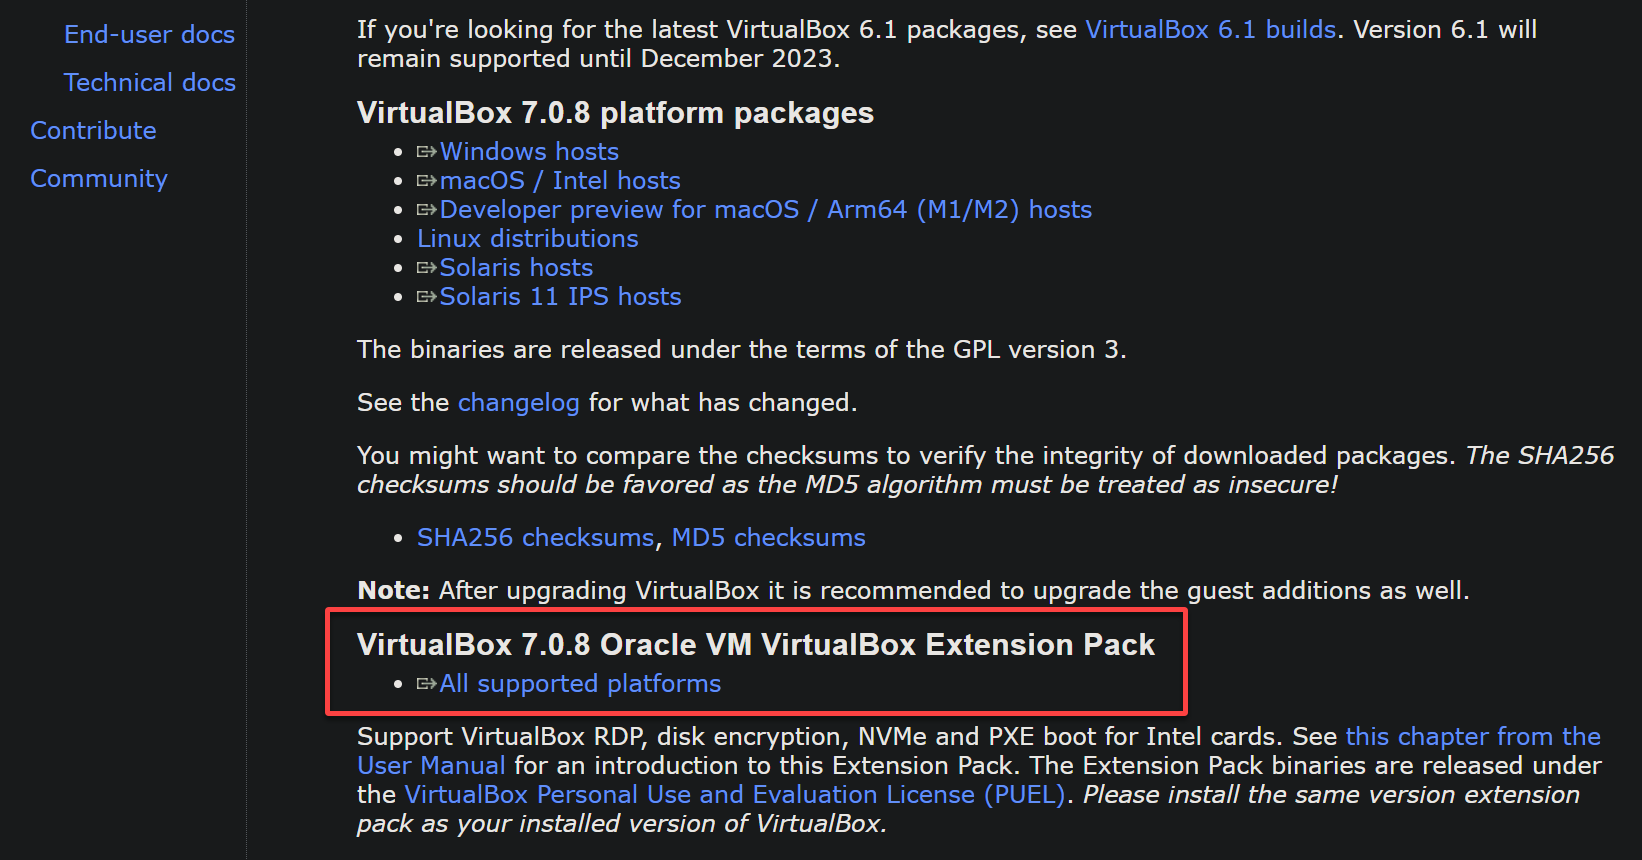 Downloading the VirtualBox Extension Pack